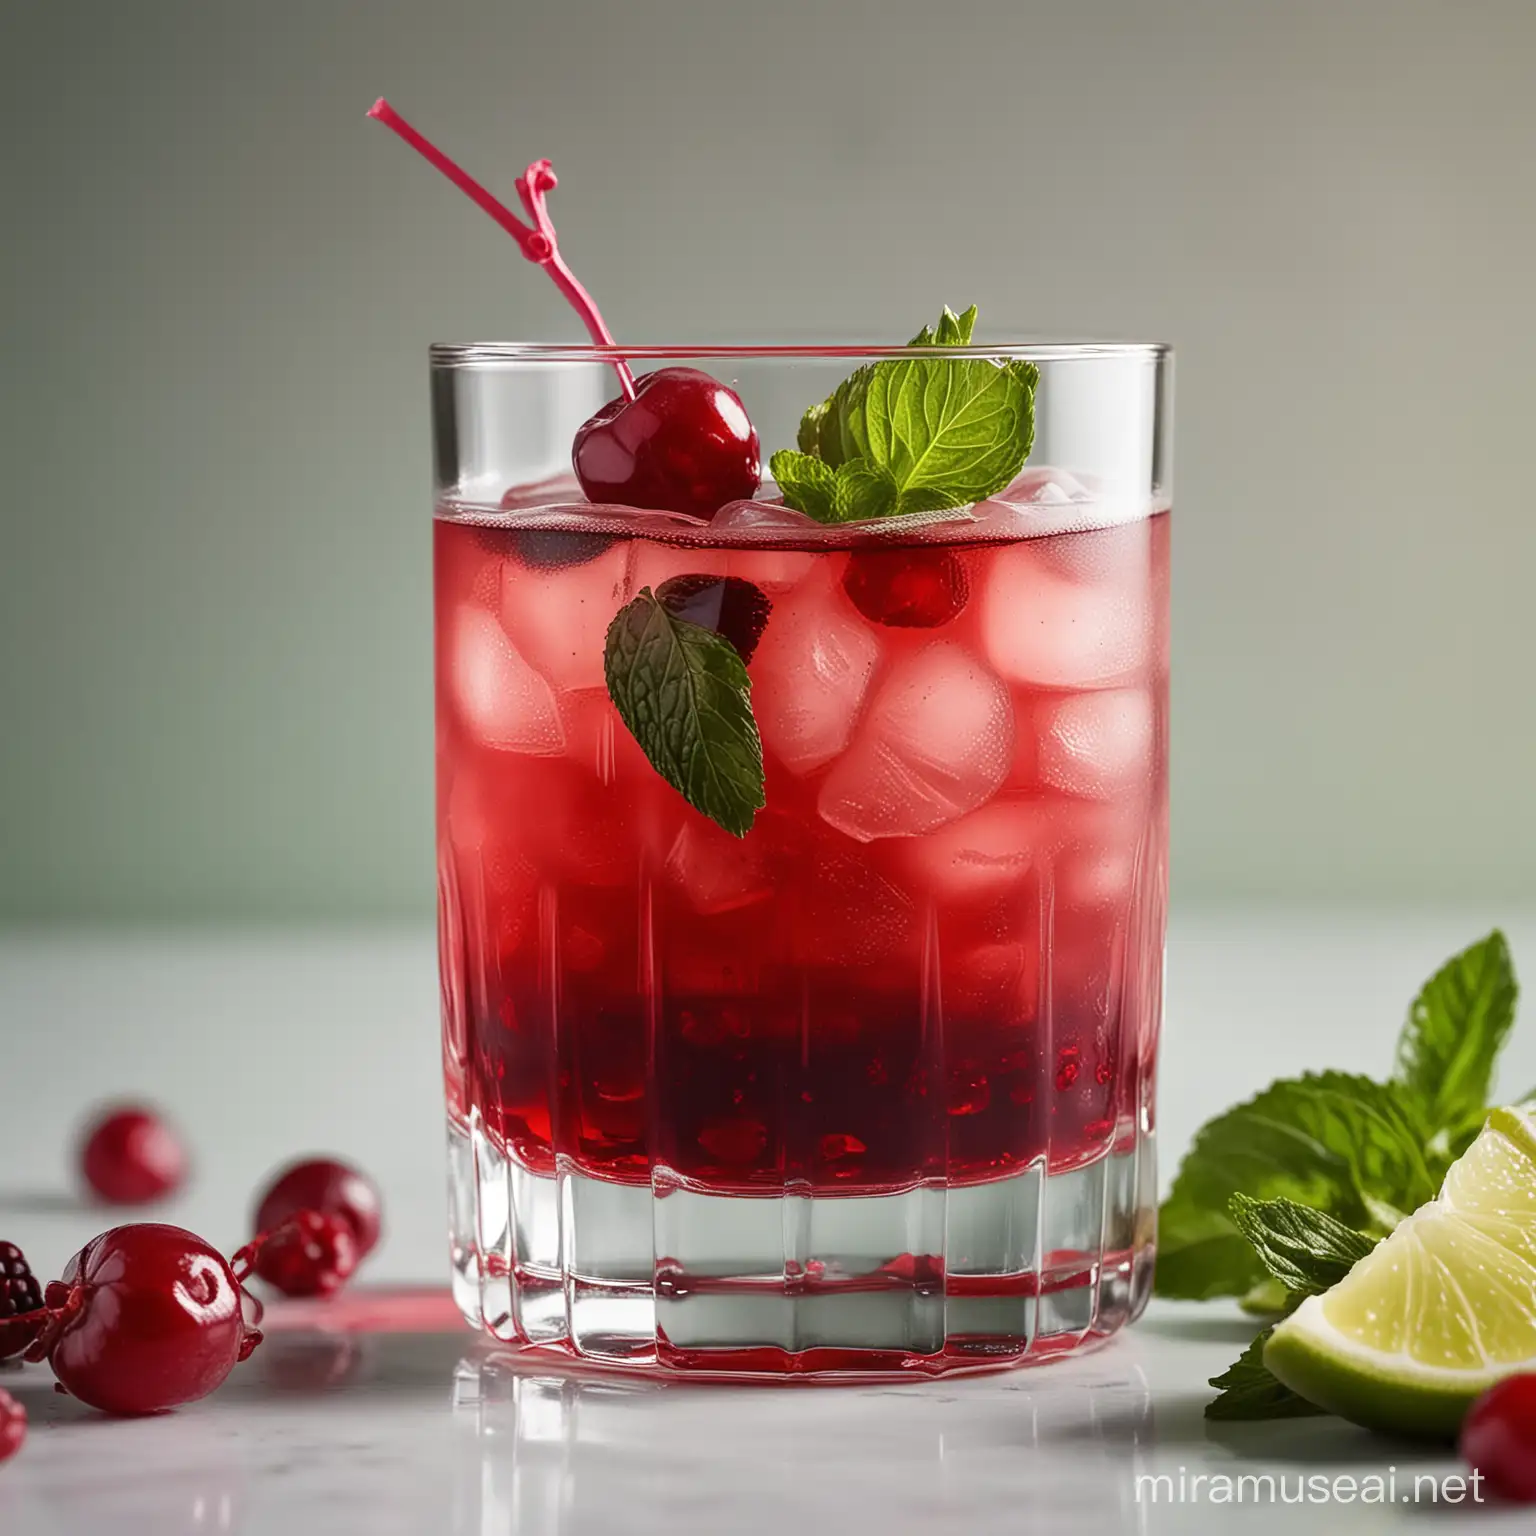 IMAGE_TYPE: Food Photography | GENRE: Refreshing | EMOTION: Invigorating | SCENE: A vibrant Crimson Berry Delight non-alcoholic cocktail in a chilled glass, garnished with fresh mint leaves and a lime wedge, set against a bright, colorful background | ACTORS: None | LOCATION TYPE: Studio | CAMERA MODEL: Canon EOS 5D Mark IV | CAMERA LENSE: 100mm f/2.8 Macro | SPECIAL EFFECTS: Bright, vivid colors | TAGS: non-alcoholic cocktail, Crimson Berry Delight, refreshing, mixed berries, pomegranate, cranberry, lime, mint, food photography --ar 4:5